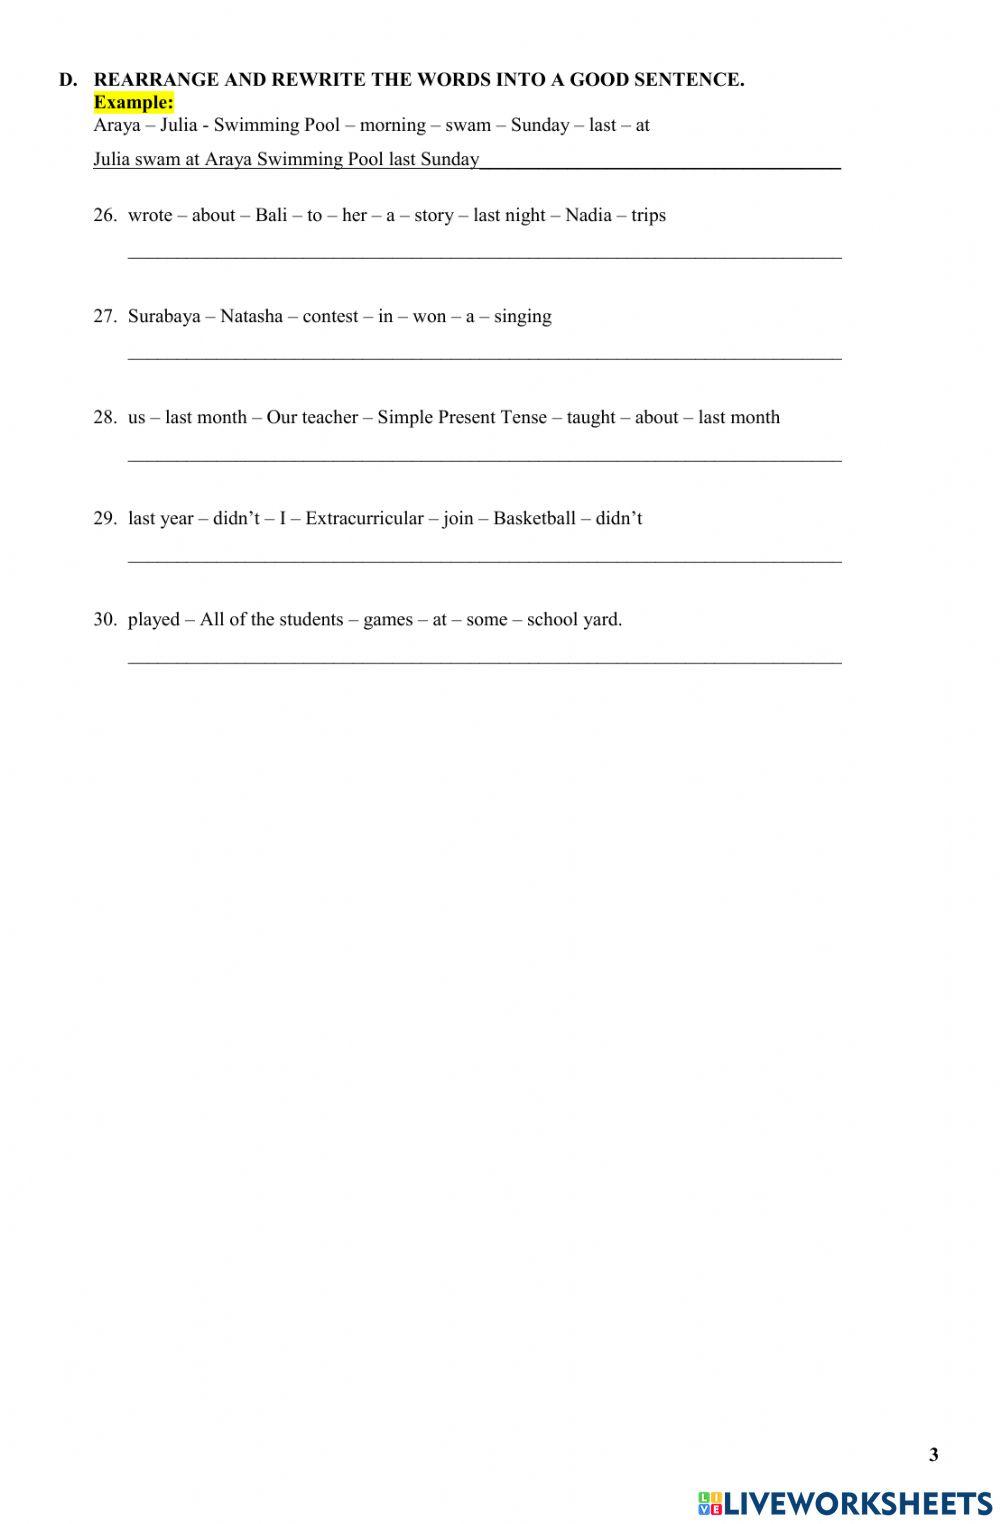 Meeting 10 - simple past tense (exercises)